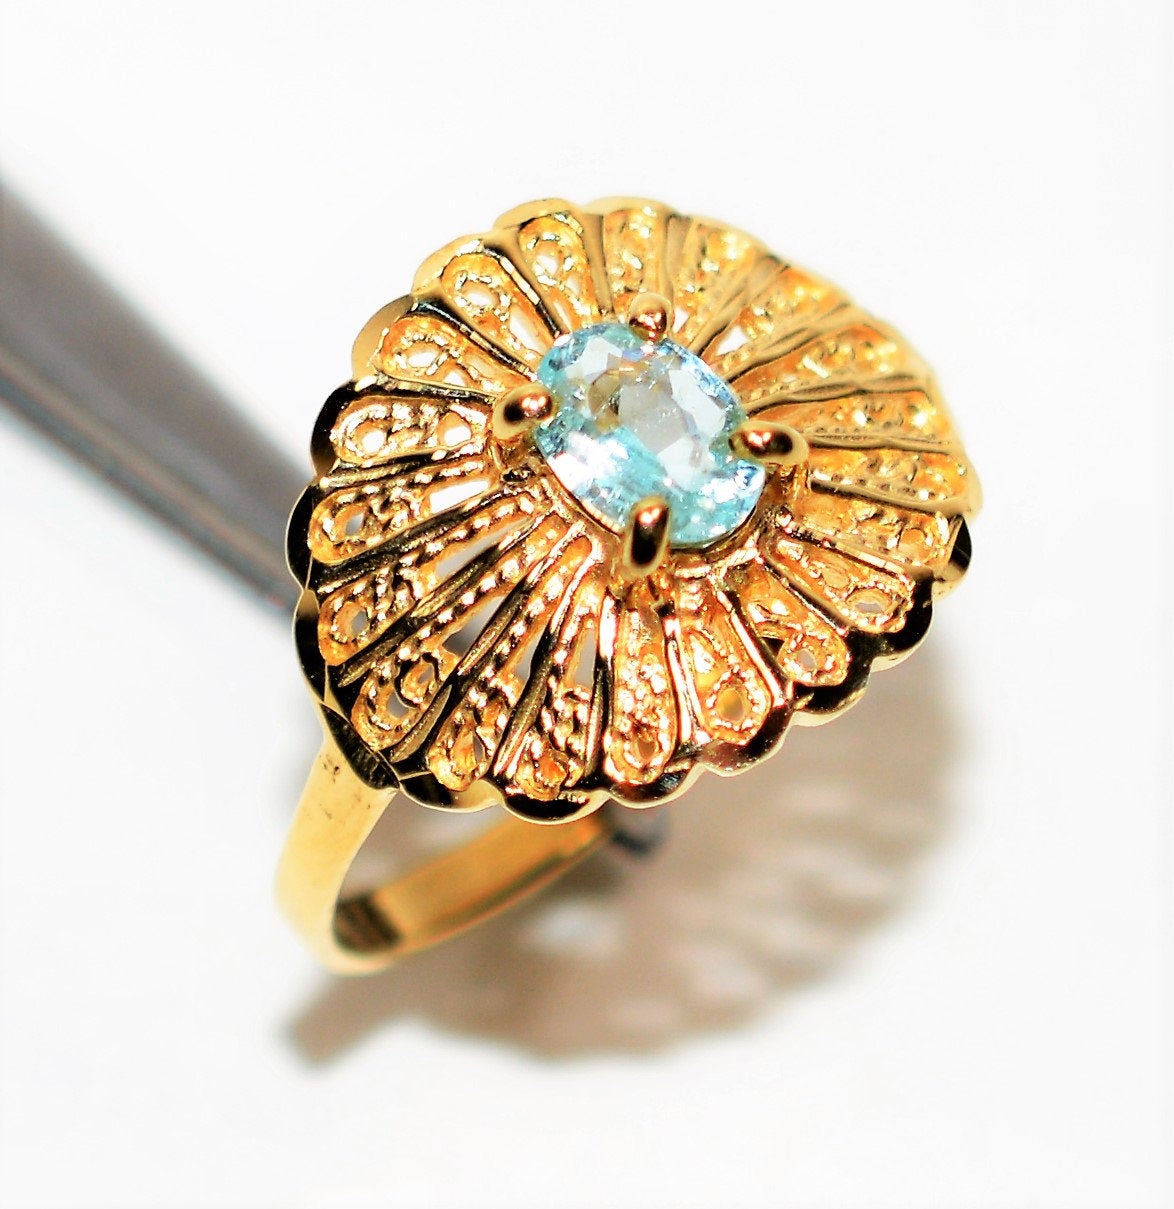 Natural Paraiba Tourmaline Ring 10K Solid Gold .50ct Solitaire Gemstone Saucer Ring Ballerina Ring Women's Ring Birthstone Jewelry Jewellery